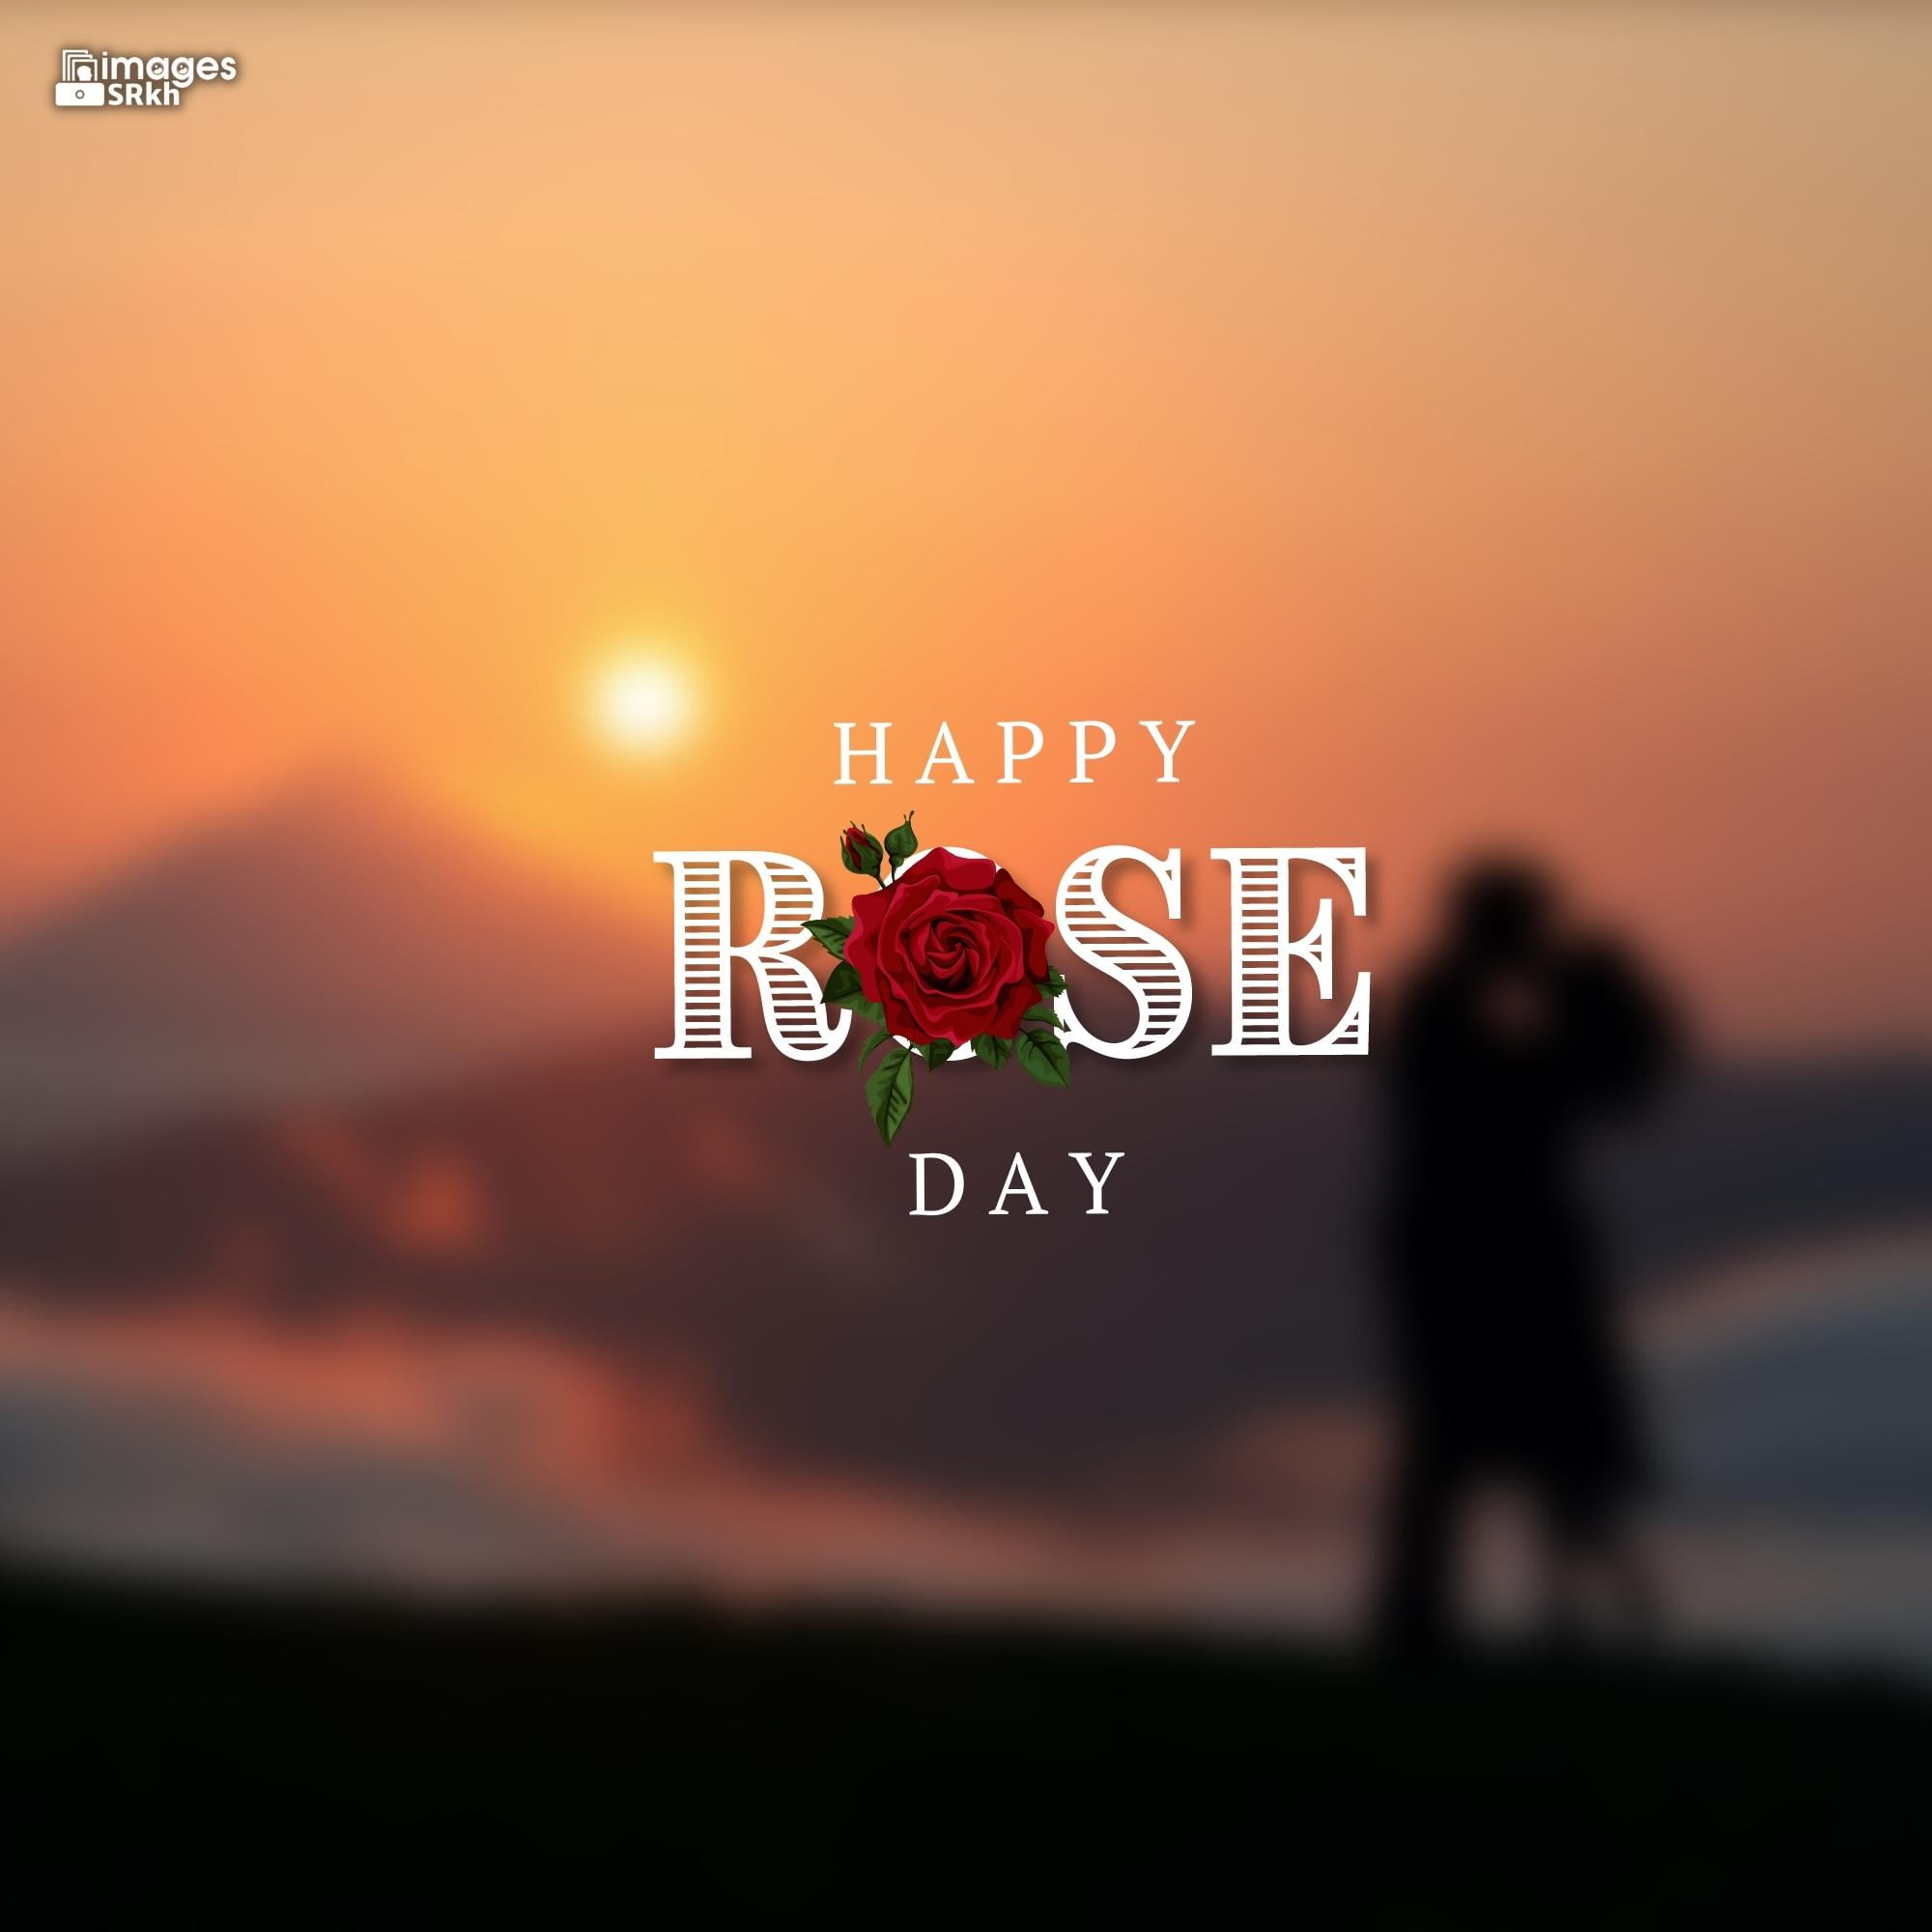 Romantic Rose Day Images Hd Download (8)